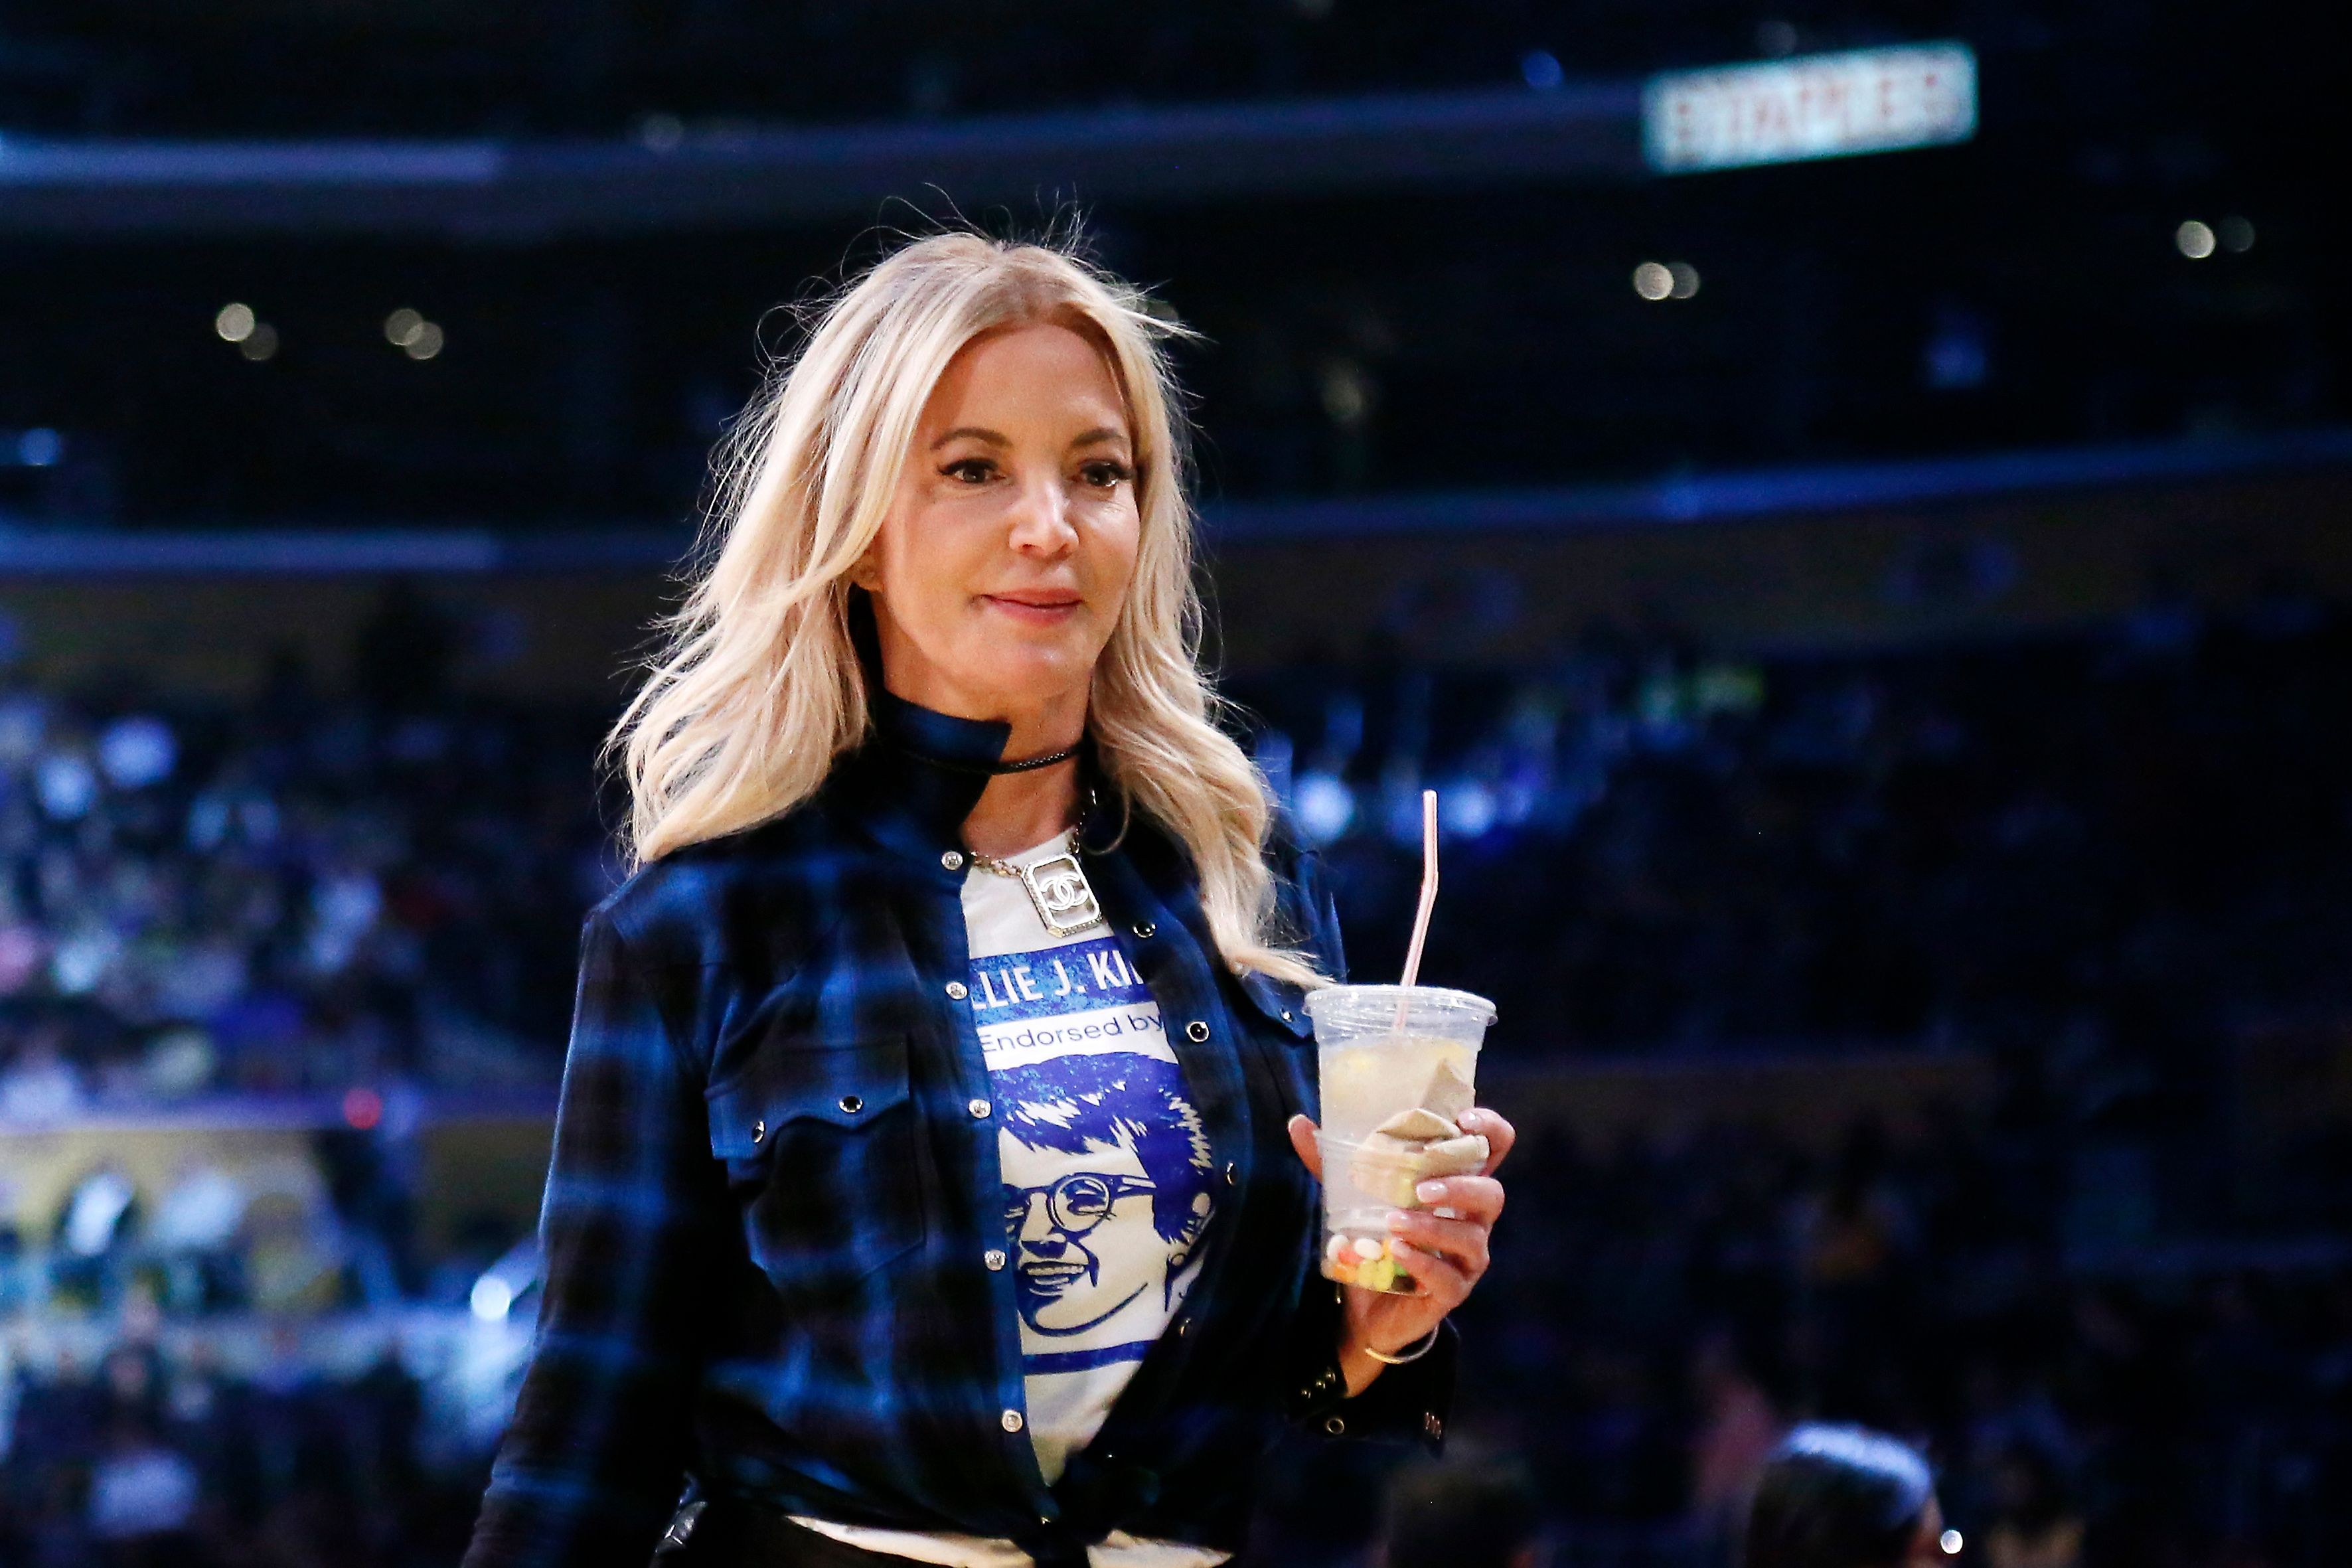 Jeanie Buss at a game between the Lakers and the Charlotte Hornets in March 2019 in Los Angeles | Source: Getty Images